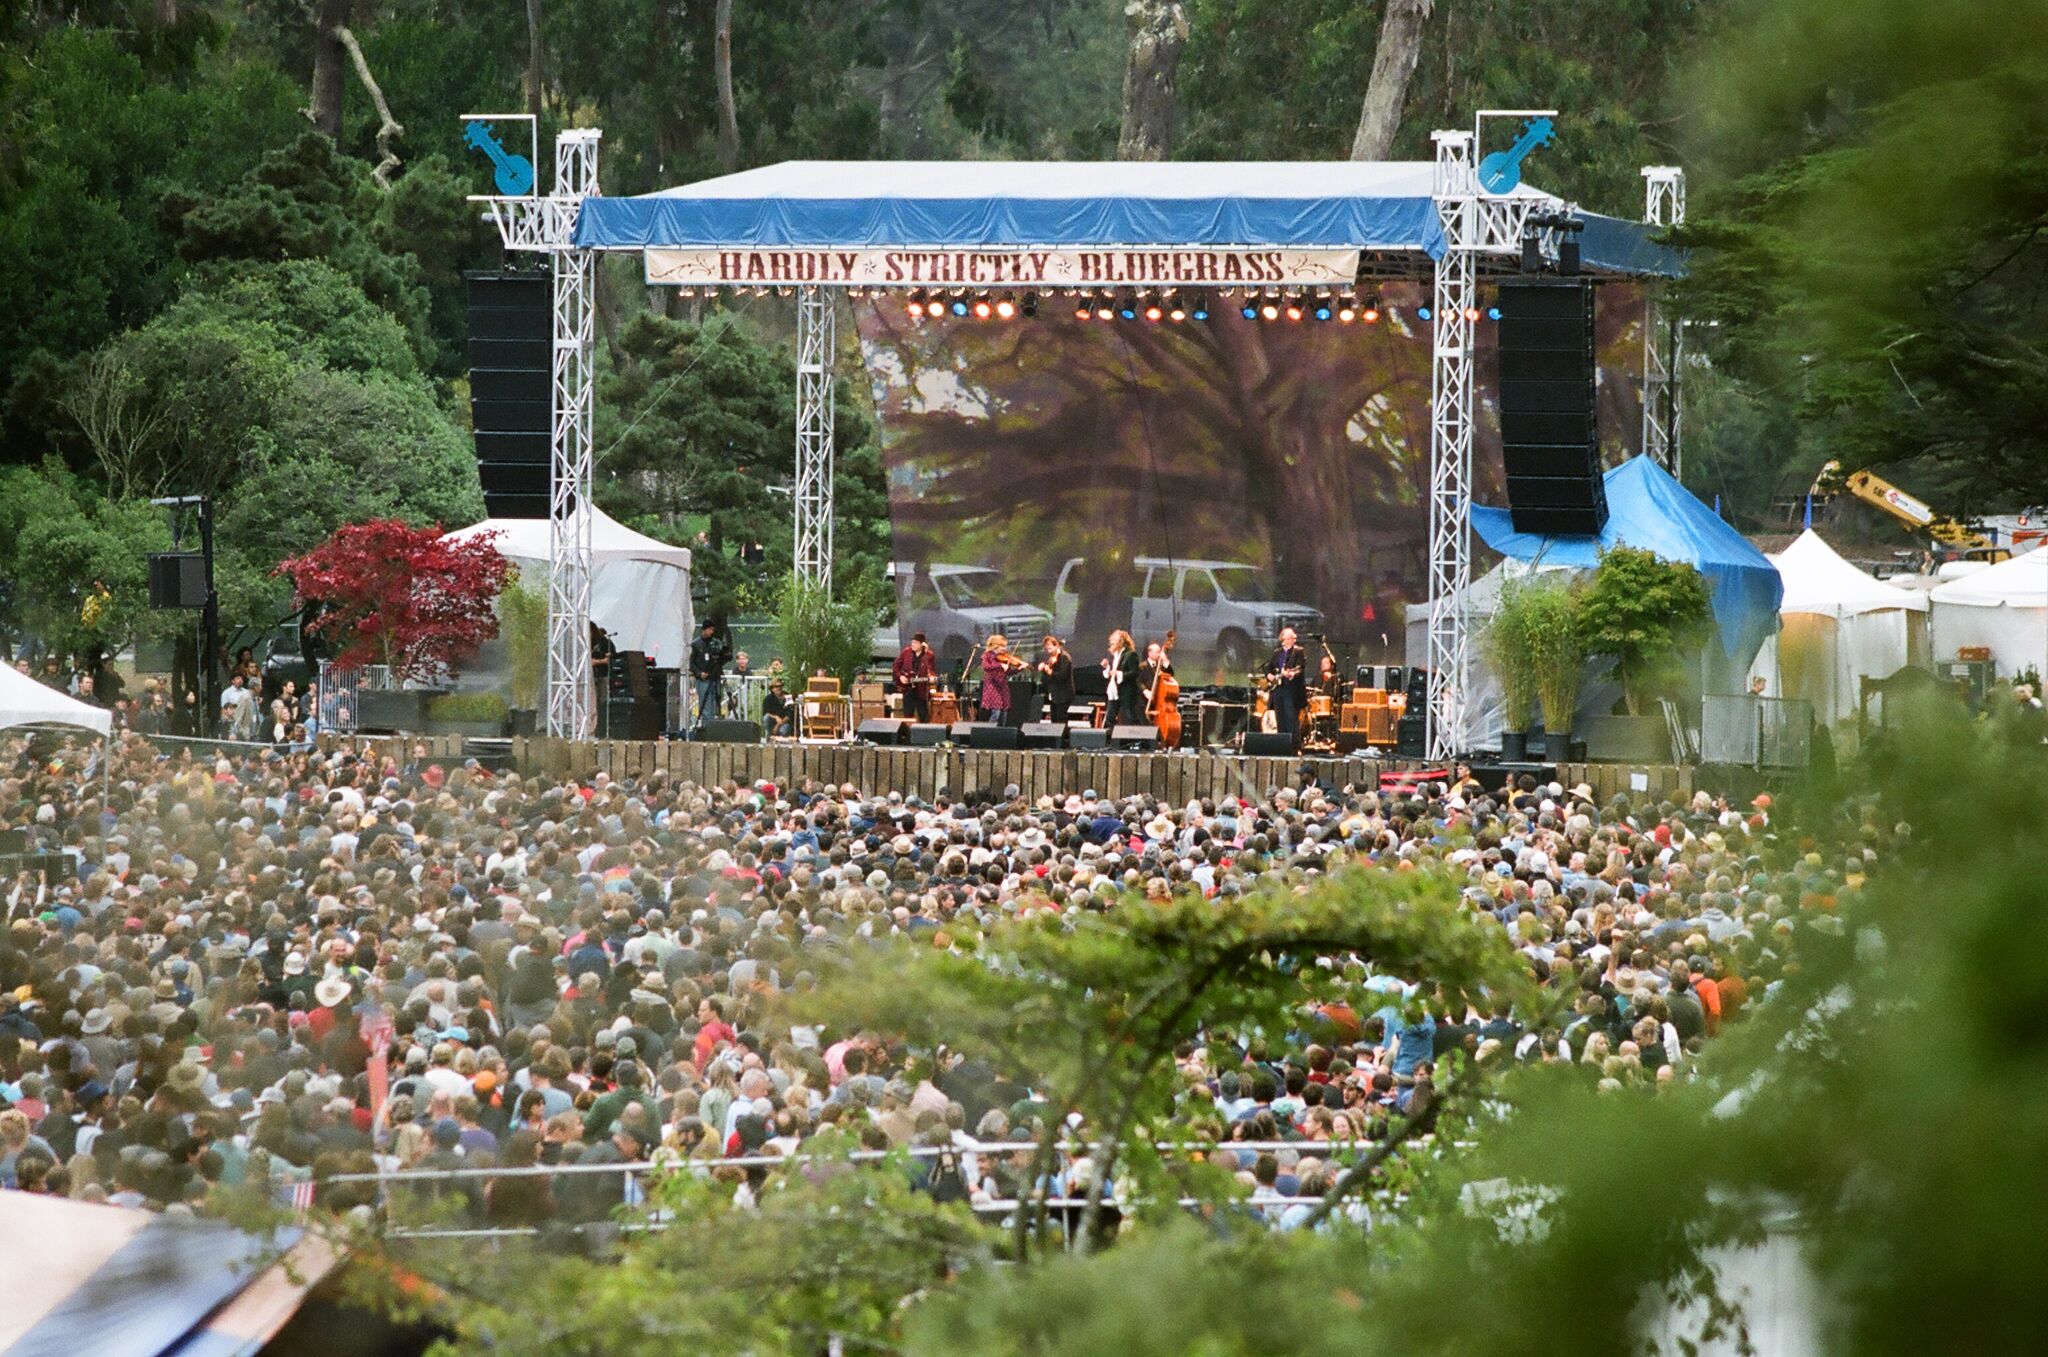 San Francisco’s Hardly Strictly Bluegrass announces exciting new lineup